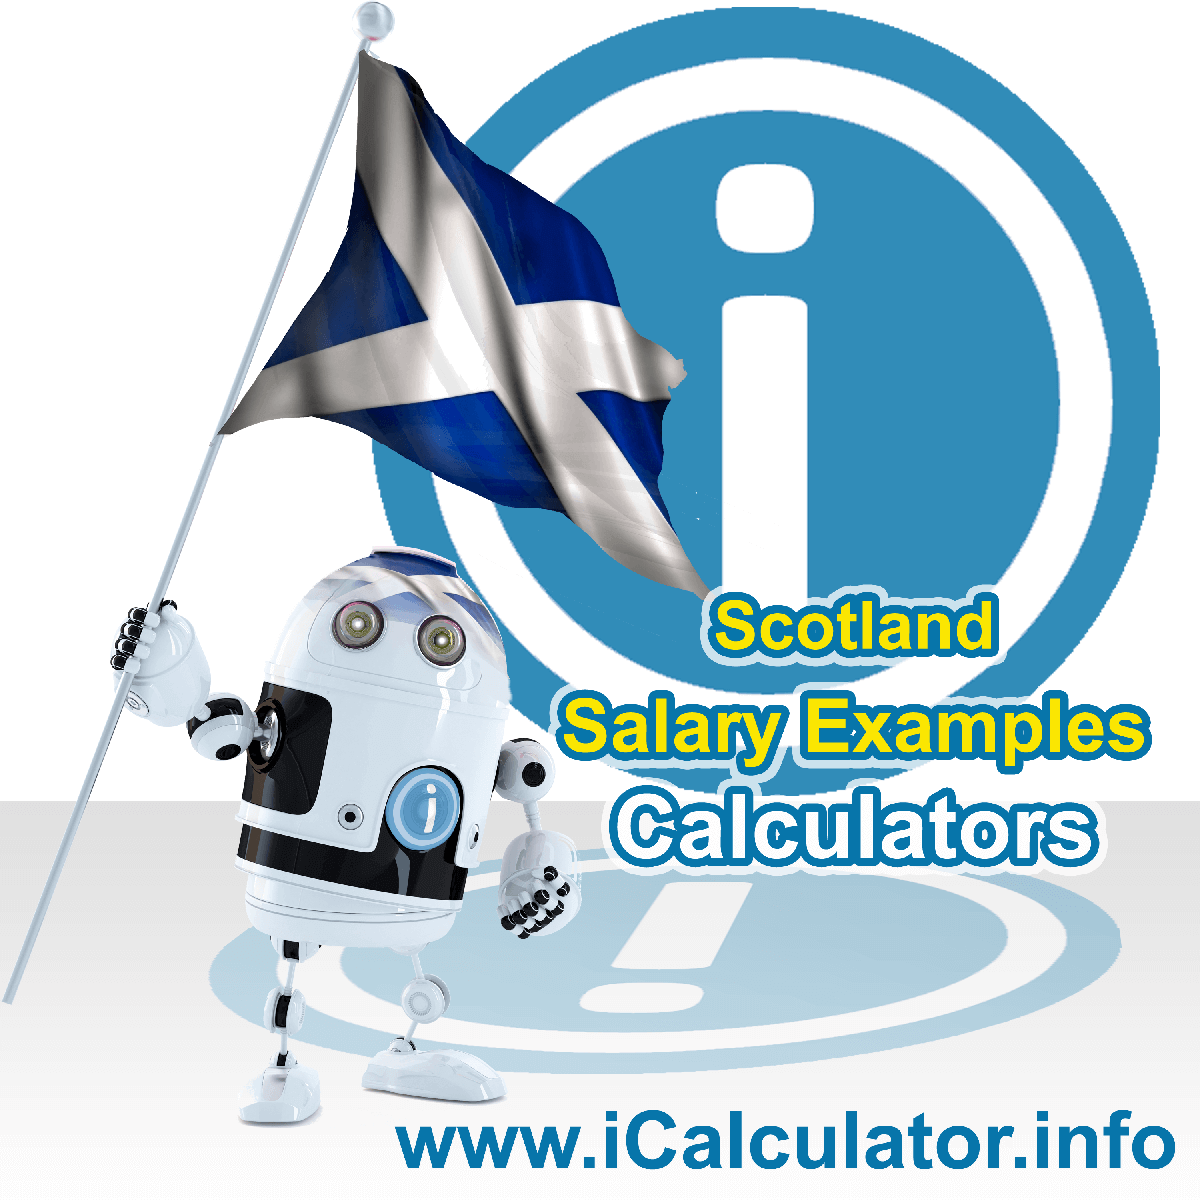 Scotland Salary Examples. This image shows the United Kingdom flag and information relating to the tax formula used to calculate Scottish Salary Examples